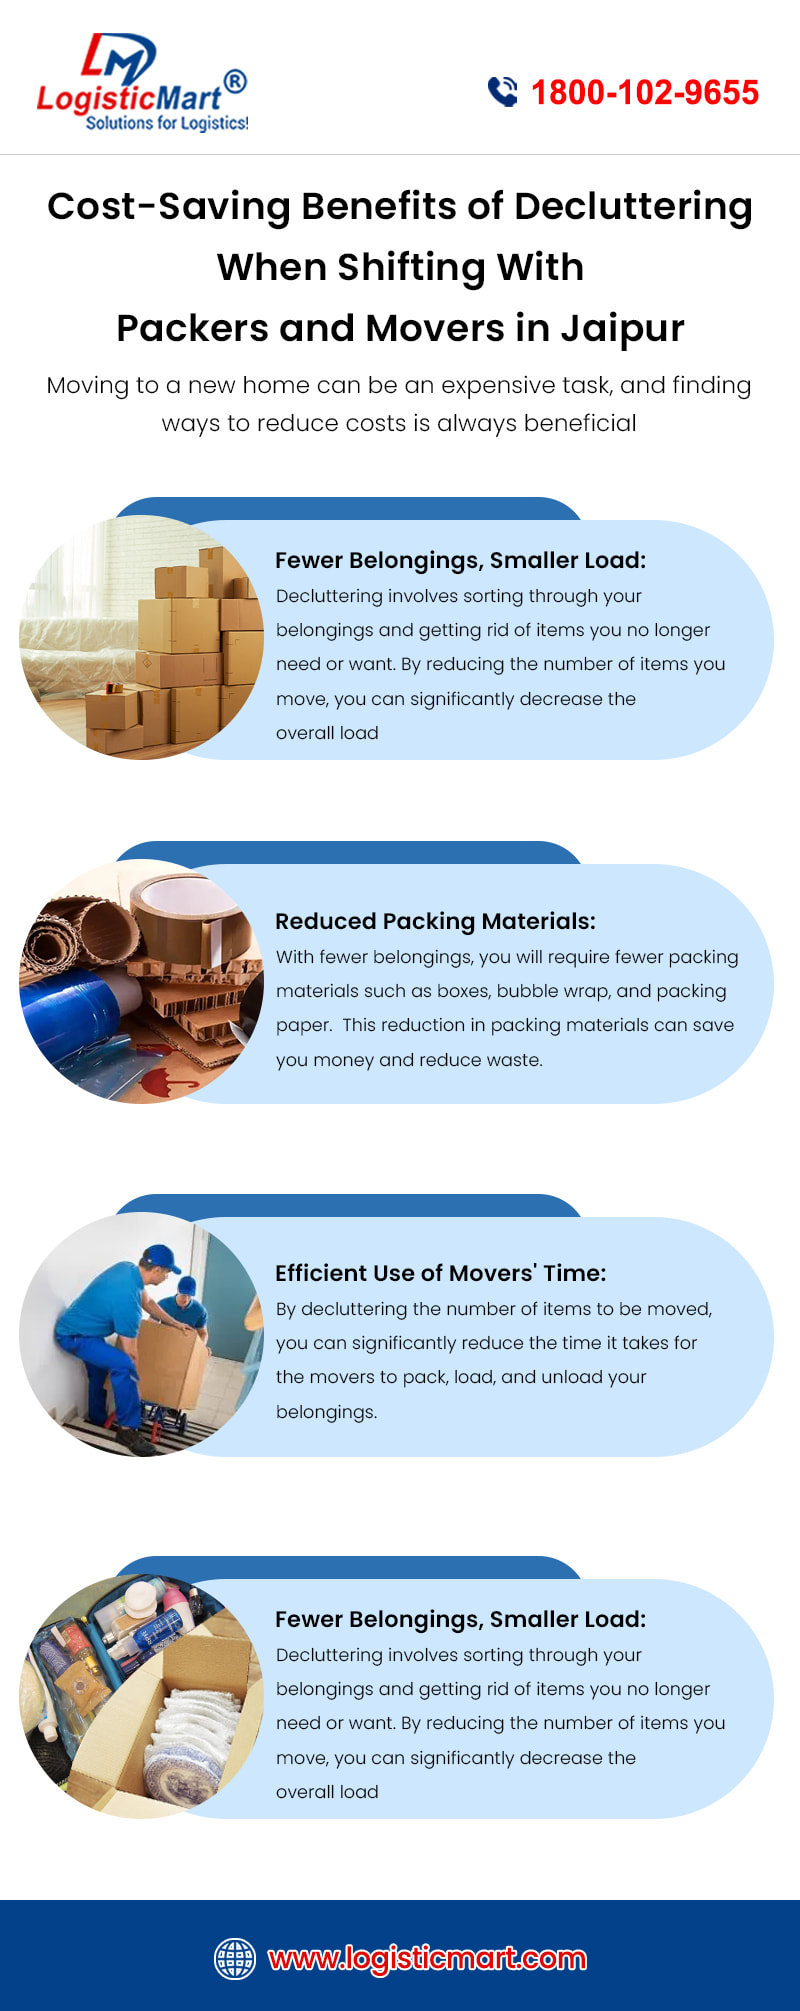 Packers and Movers jaipur